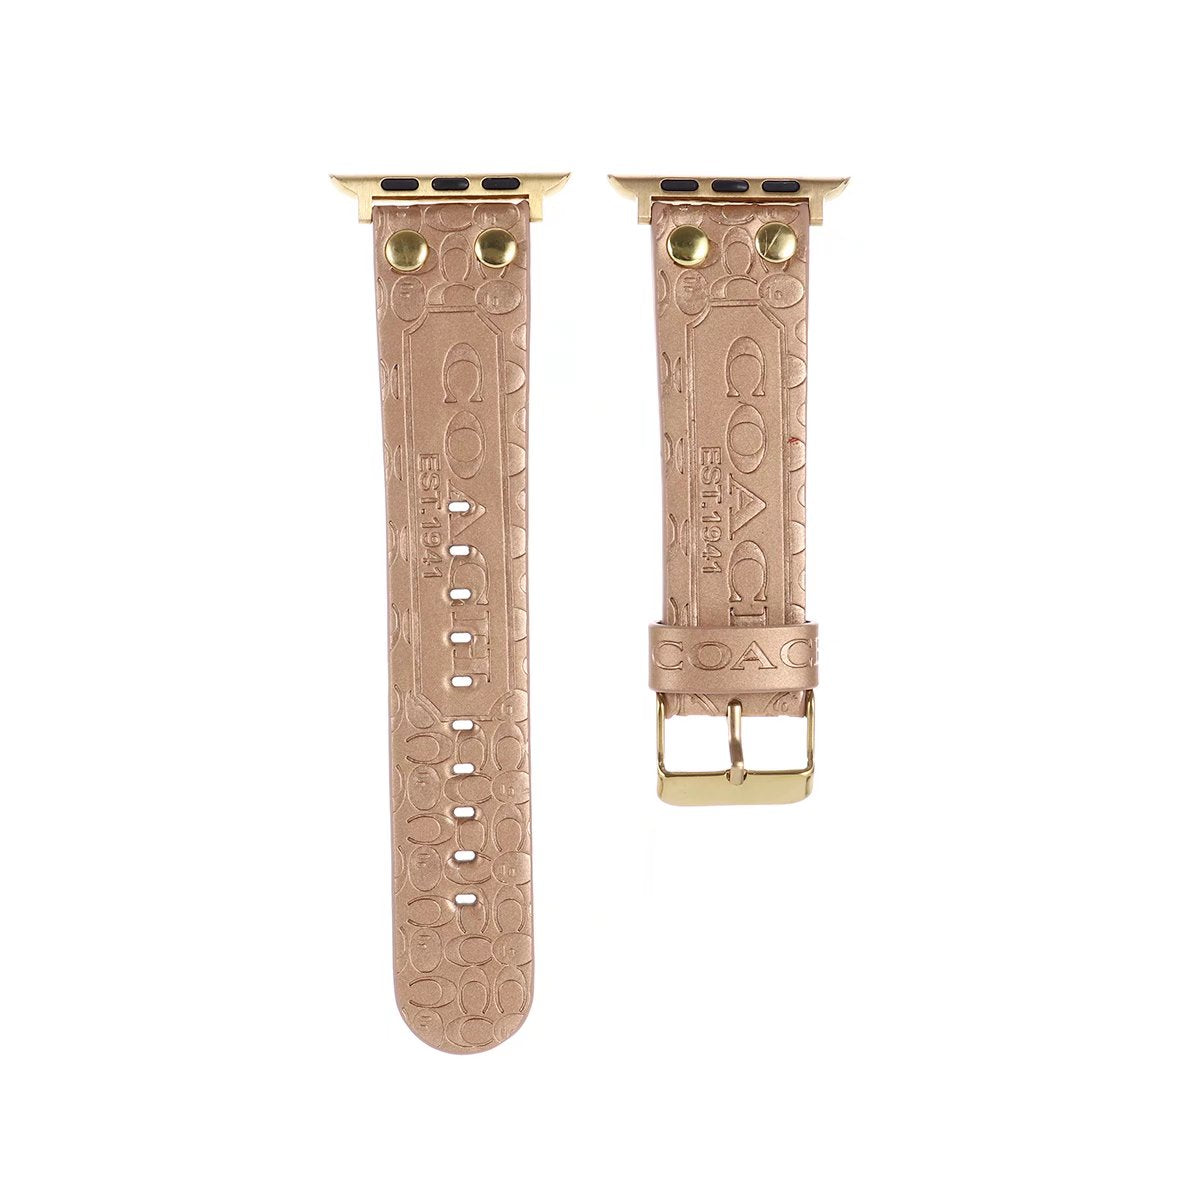 Debossed Coach Watch Band in rose gold